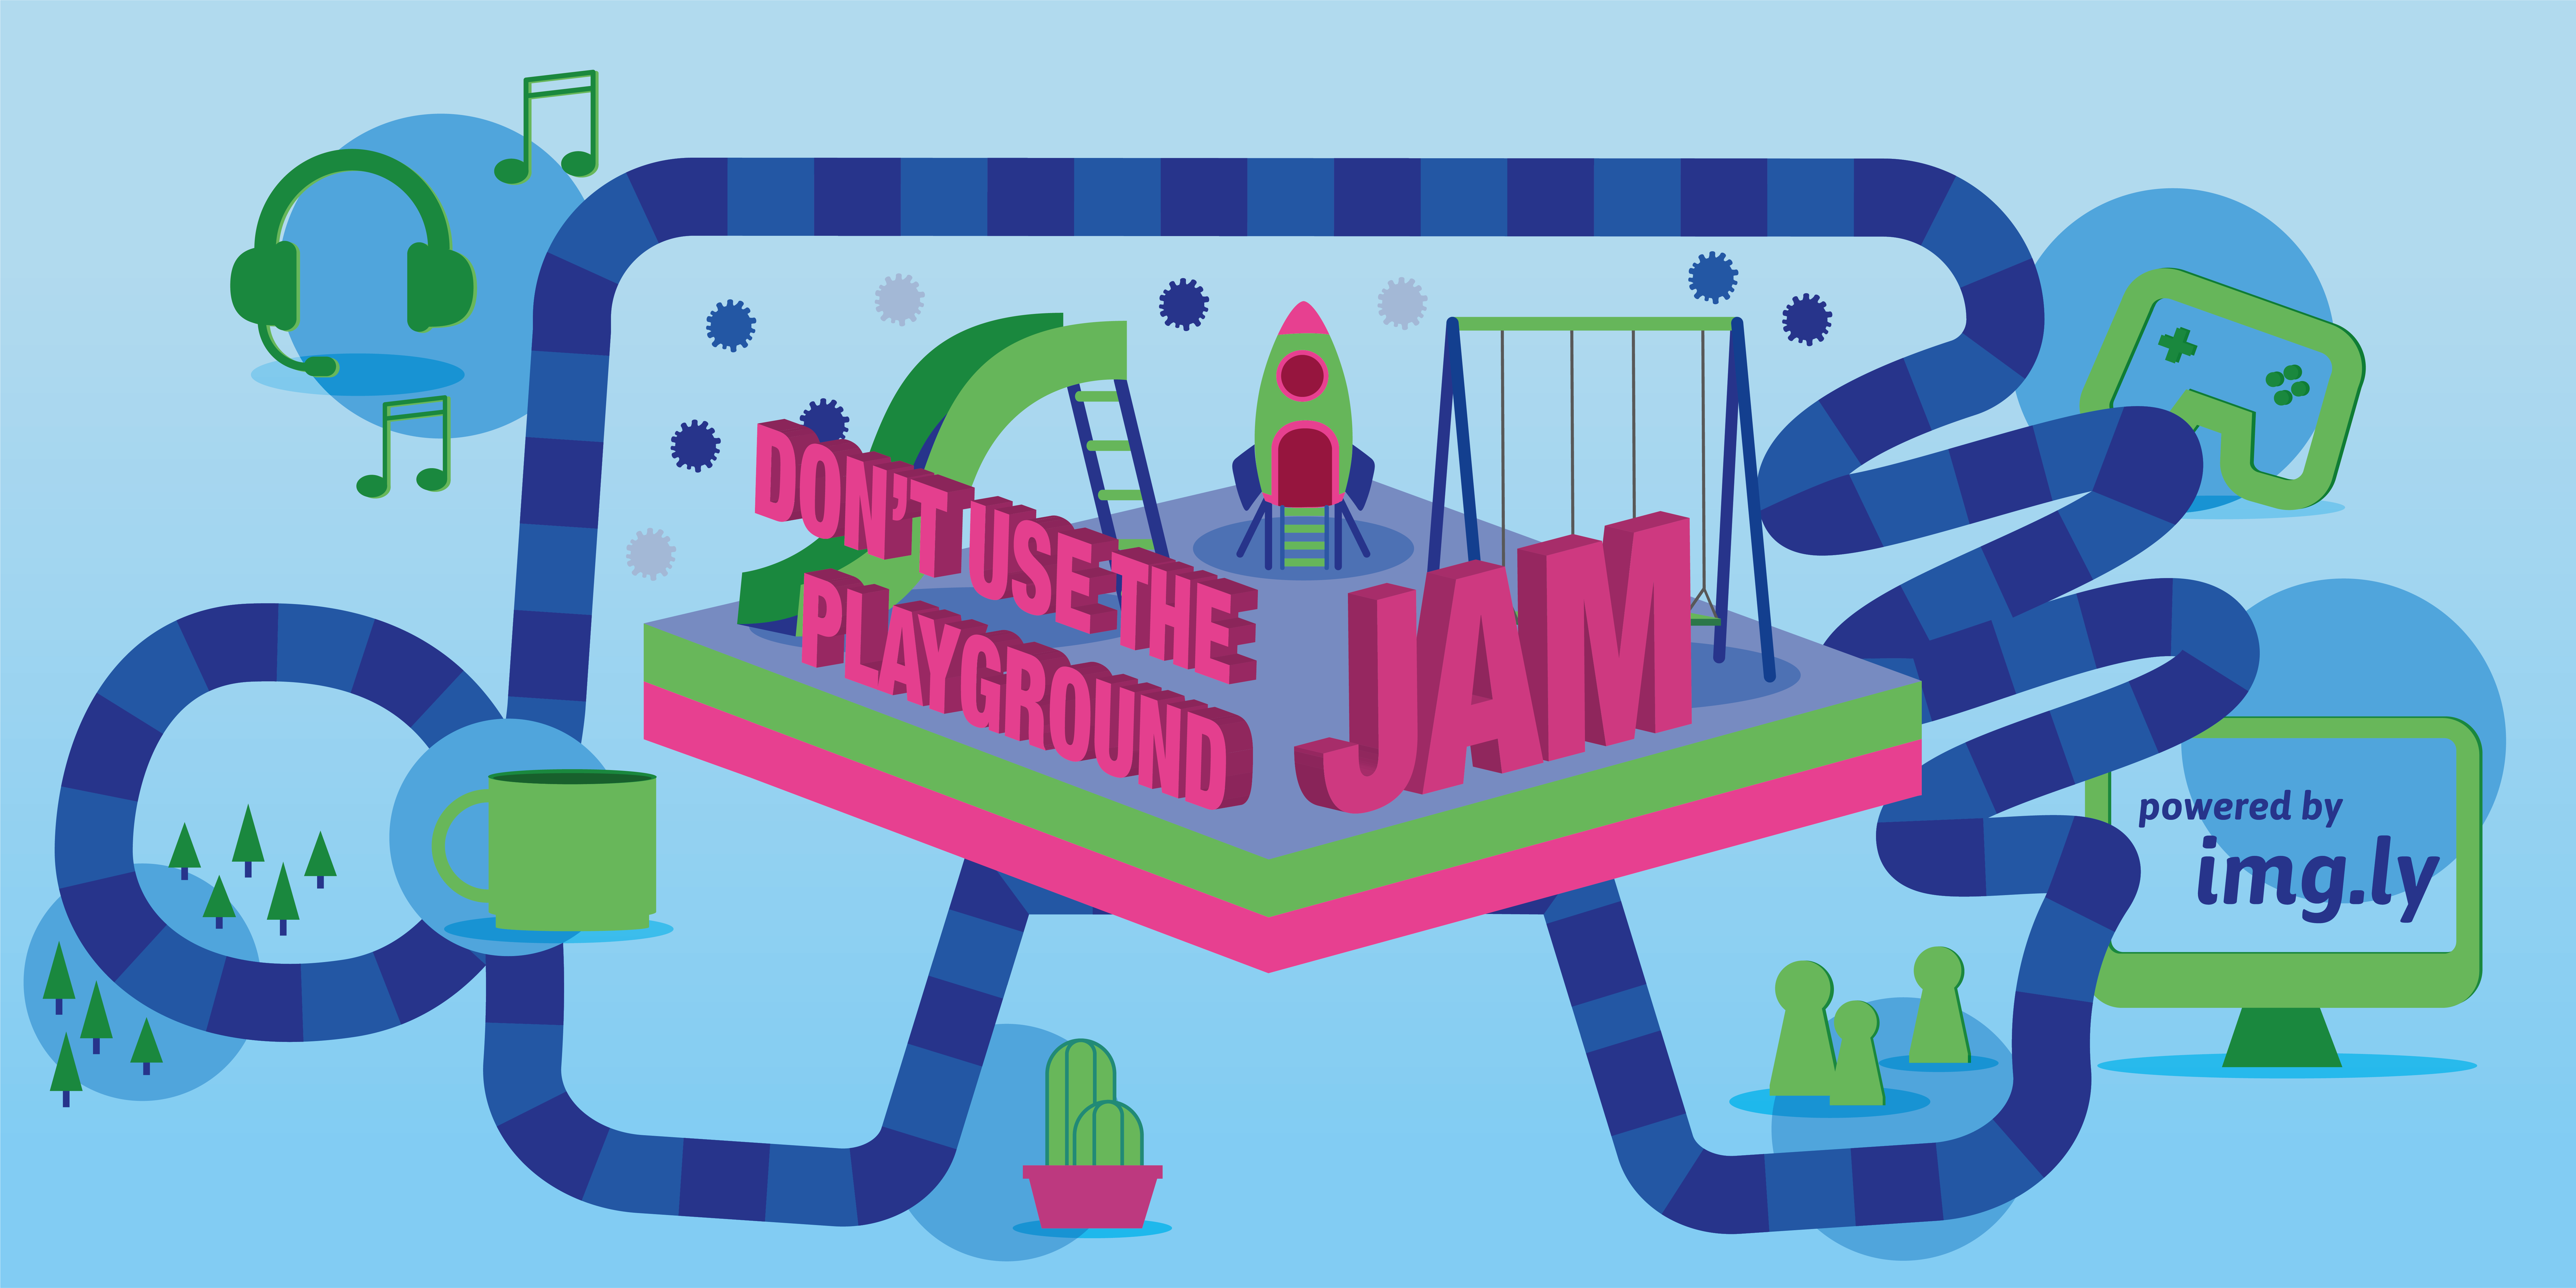 img.ly Game Jam 2020